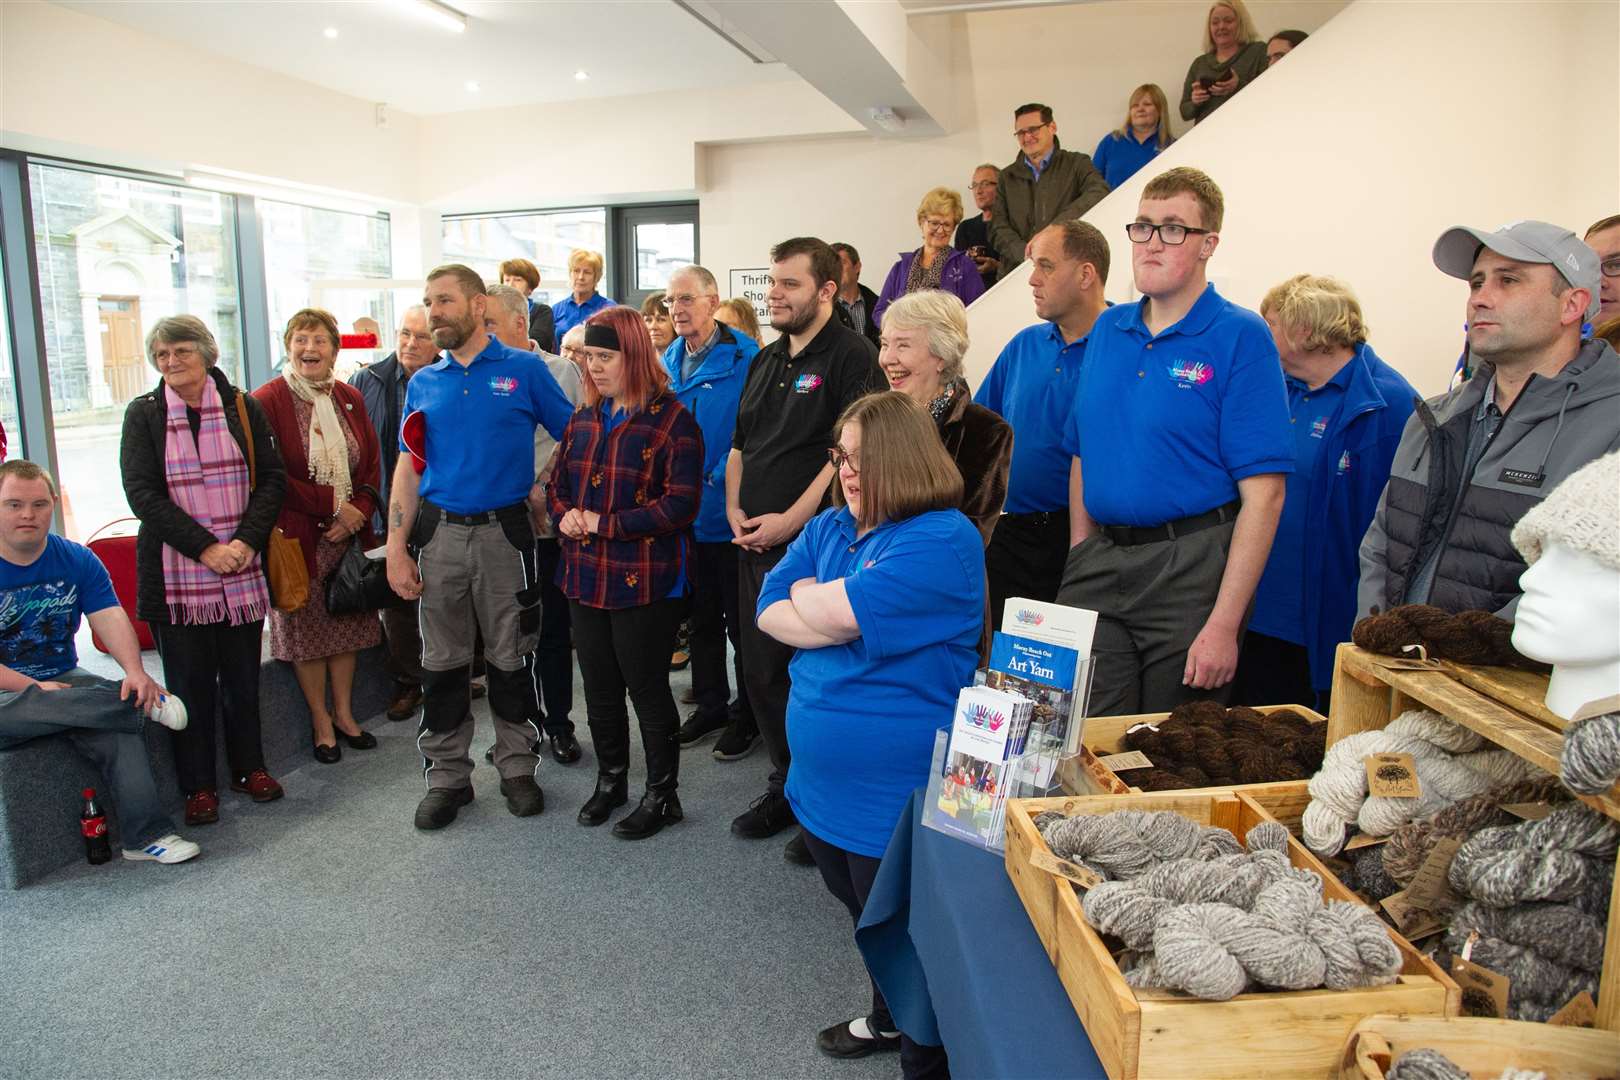 MRO staff and volunteers gather at the charity's HQ opening in Buckie last year. Picture: Daniel Forsyth